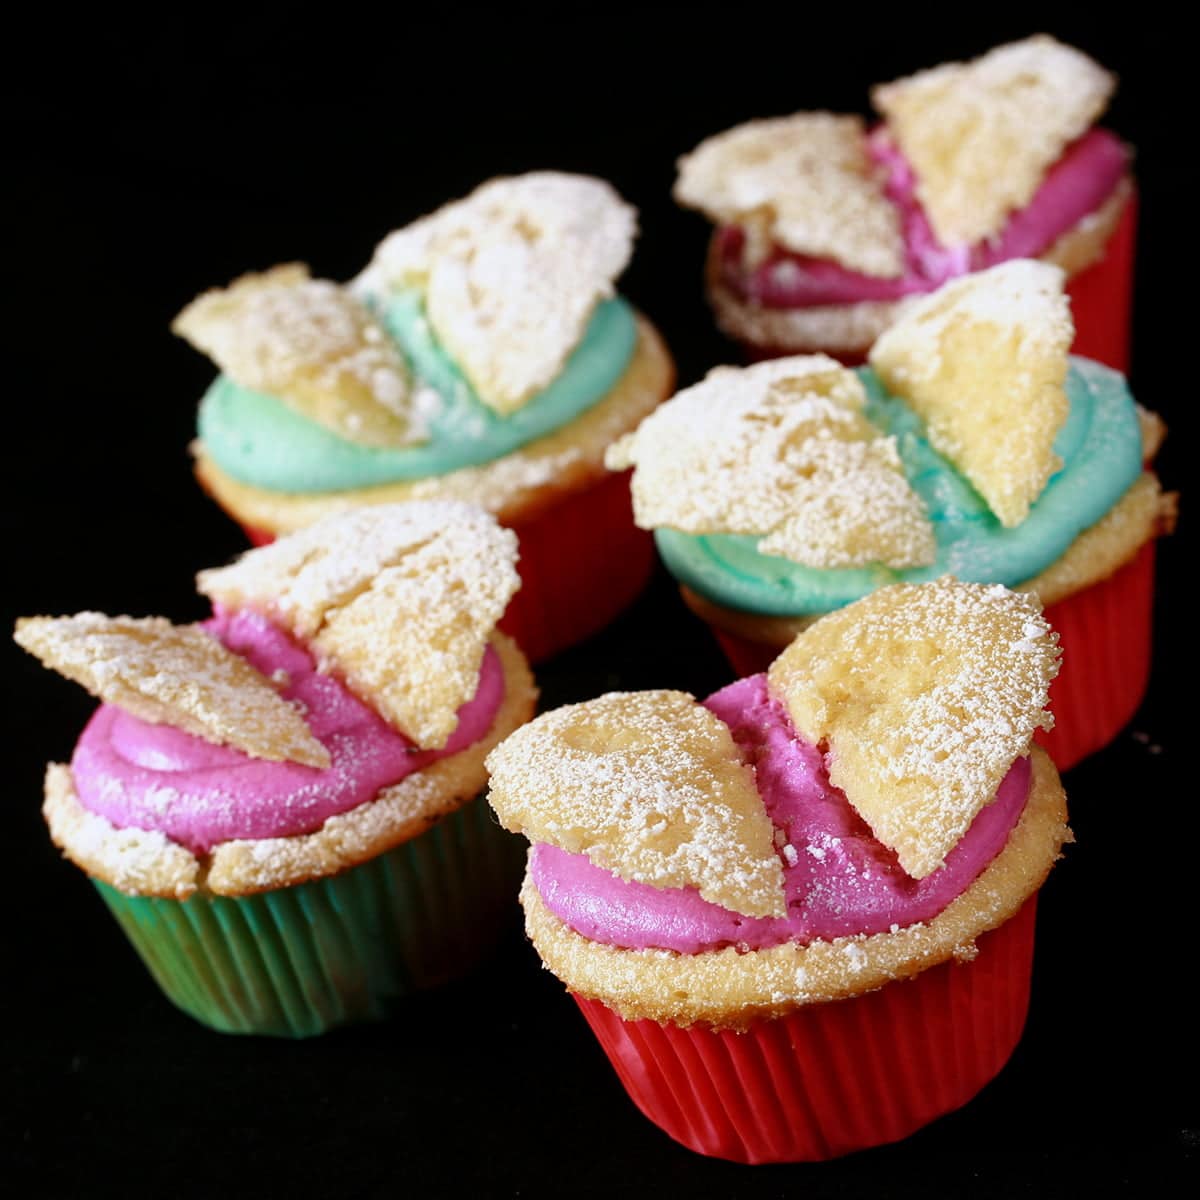 A close up view of several vanilla butterfly cupcakes. The top of each has been cut off, halved, and placed in brightly coloured frosting - teal and magenta - to form wings.